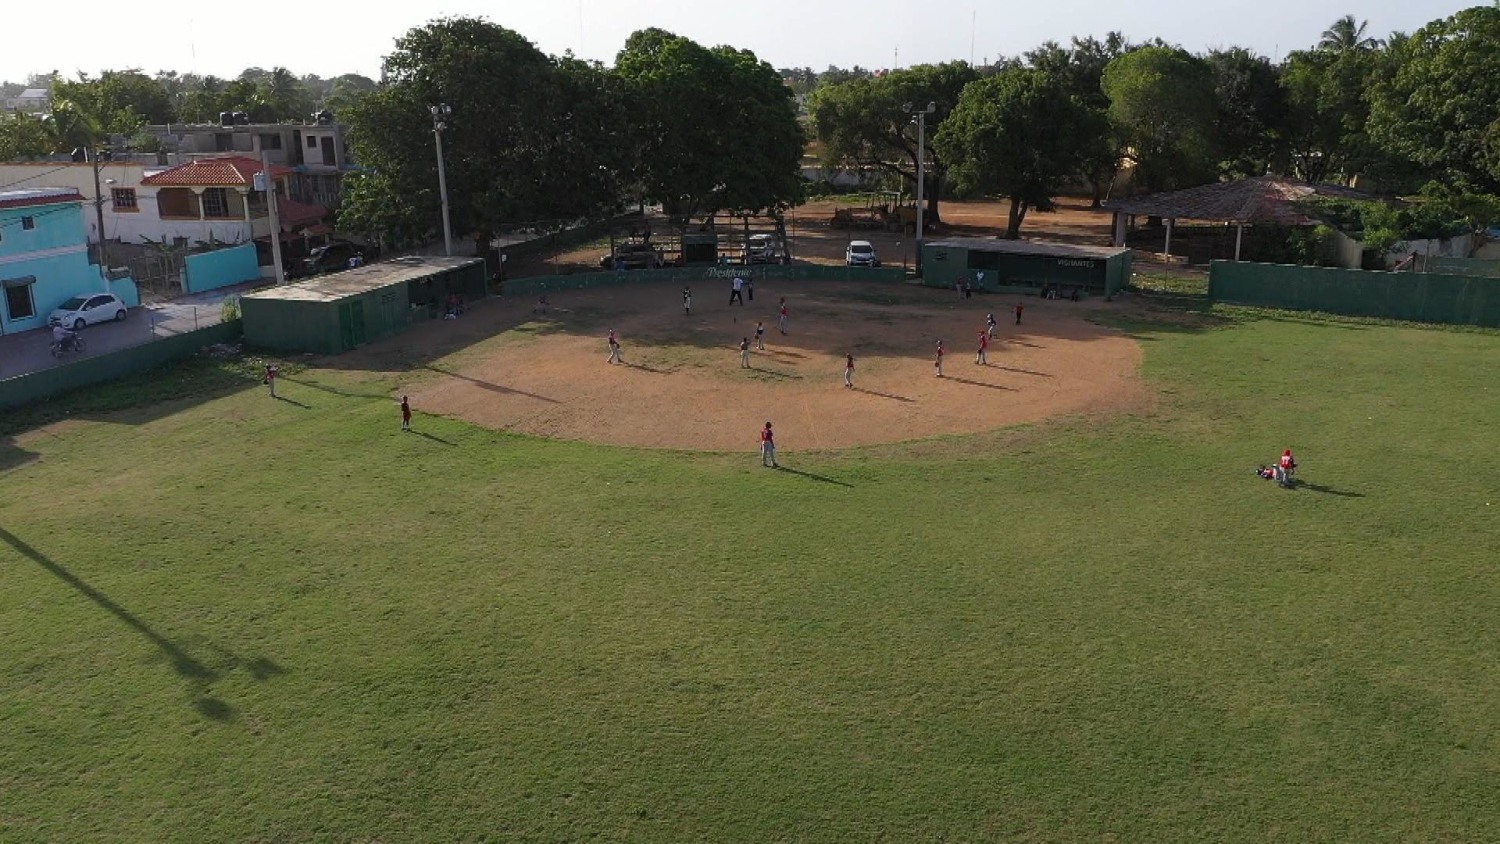 Baseball Academies in the Dominican Republic: From Sweatshops To Big  Business - Minor League Ball